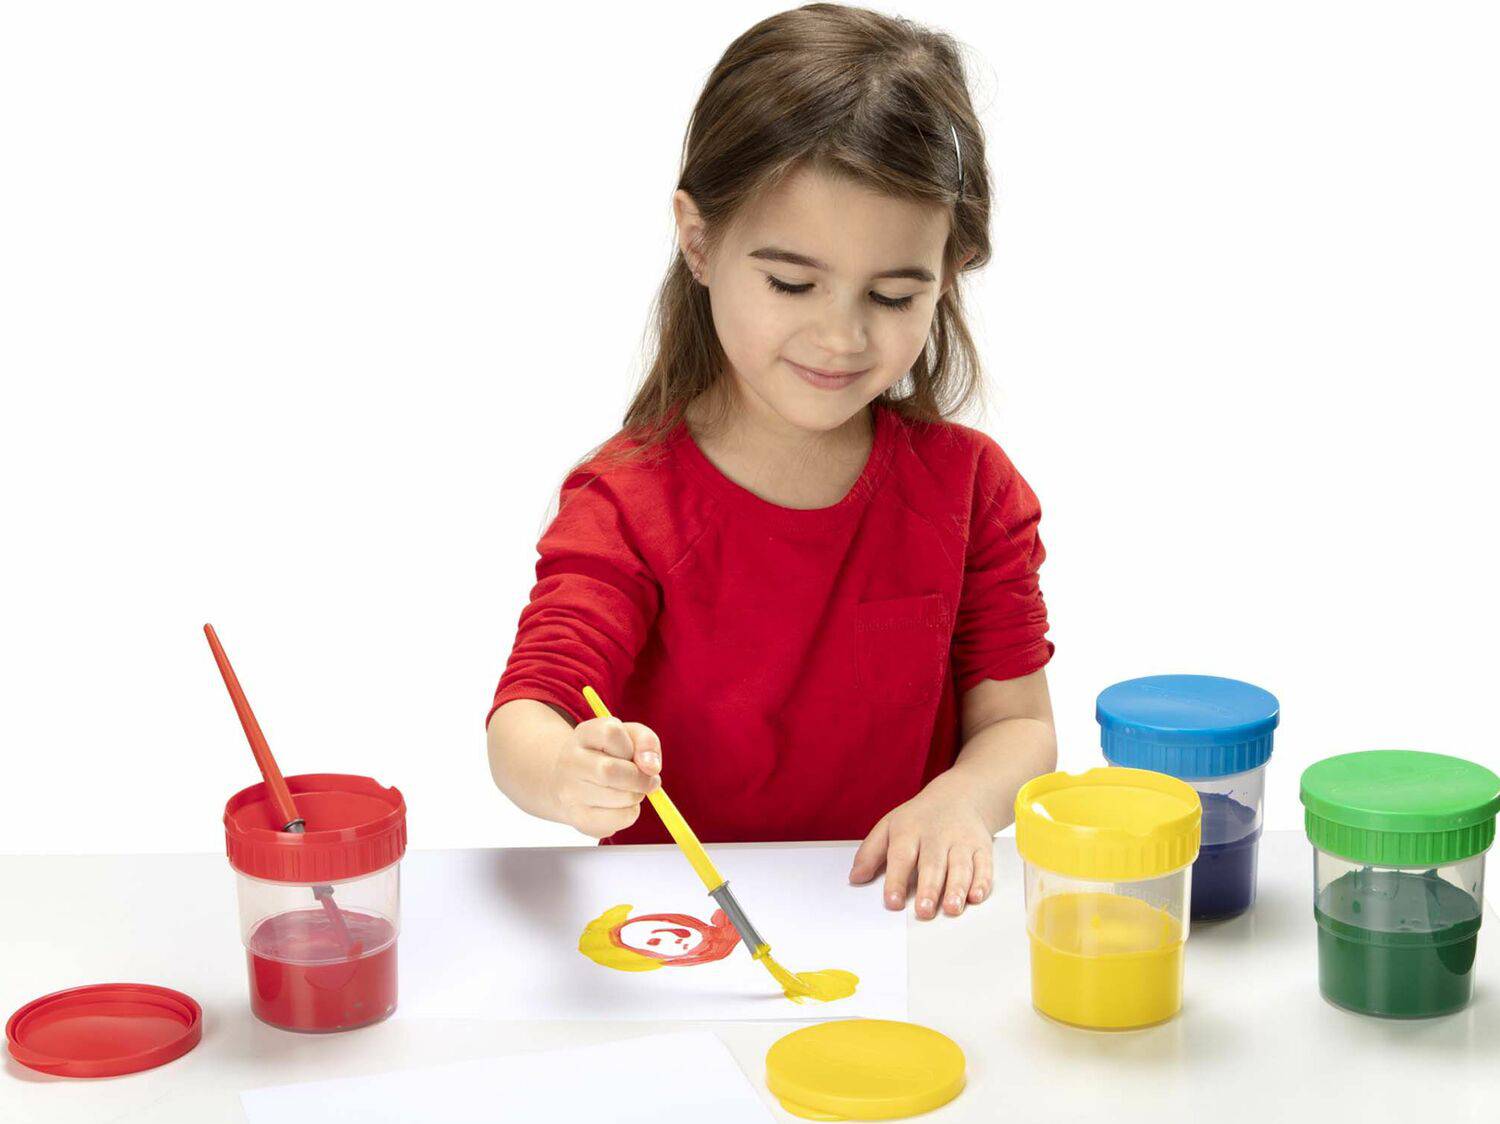 1623 SPILLPROOF PAINT CUPS - A Child's Delight